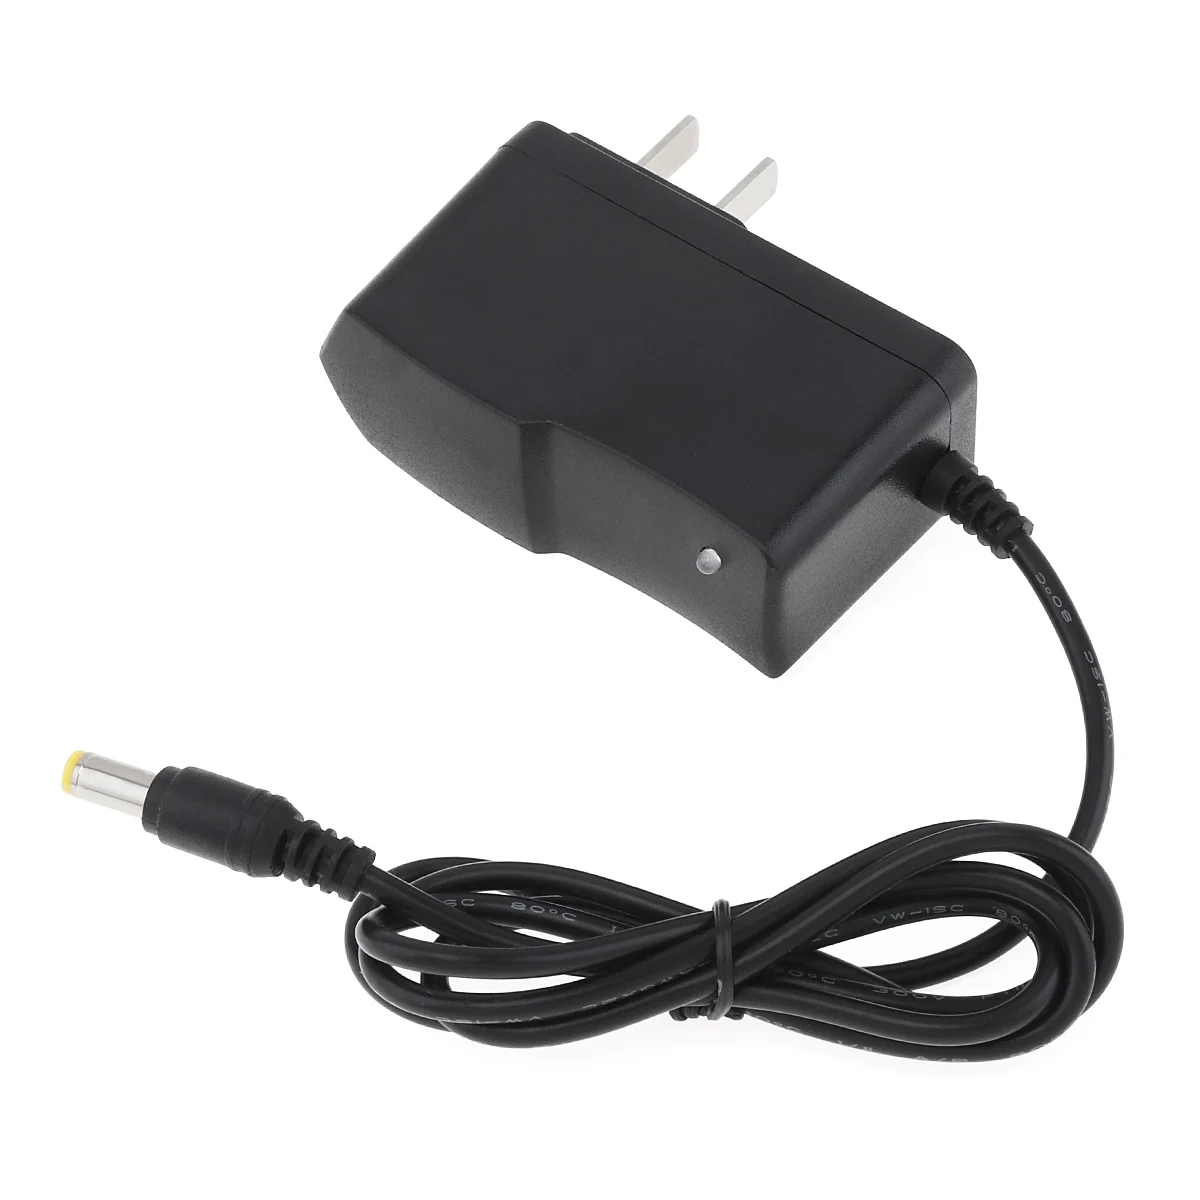 12V Portable Power Adapter Charger Used for Electric Drill Battery Charging